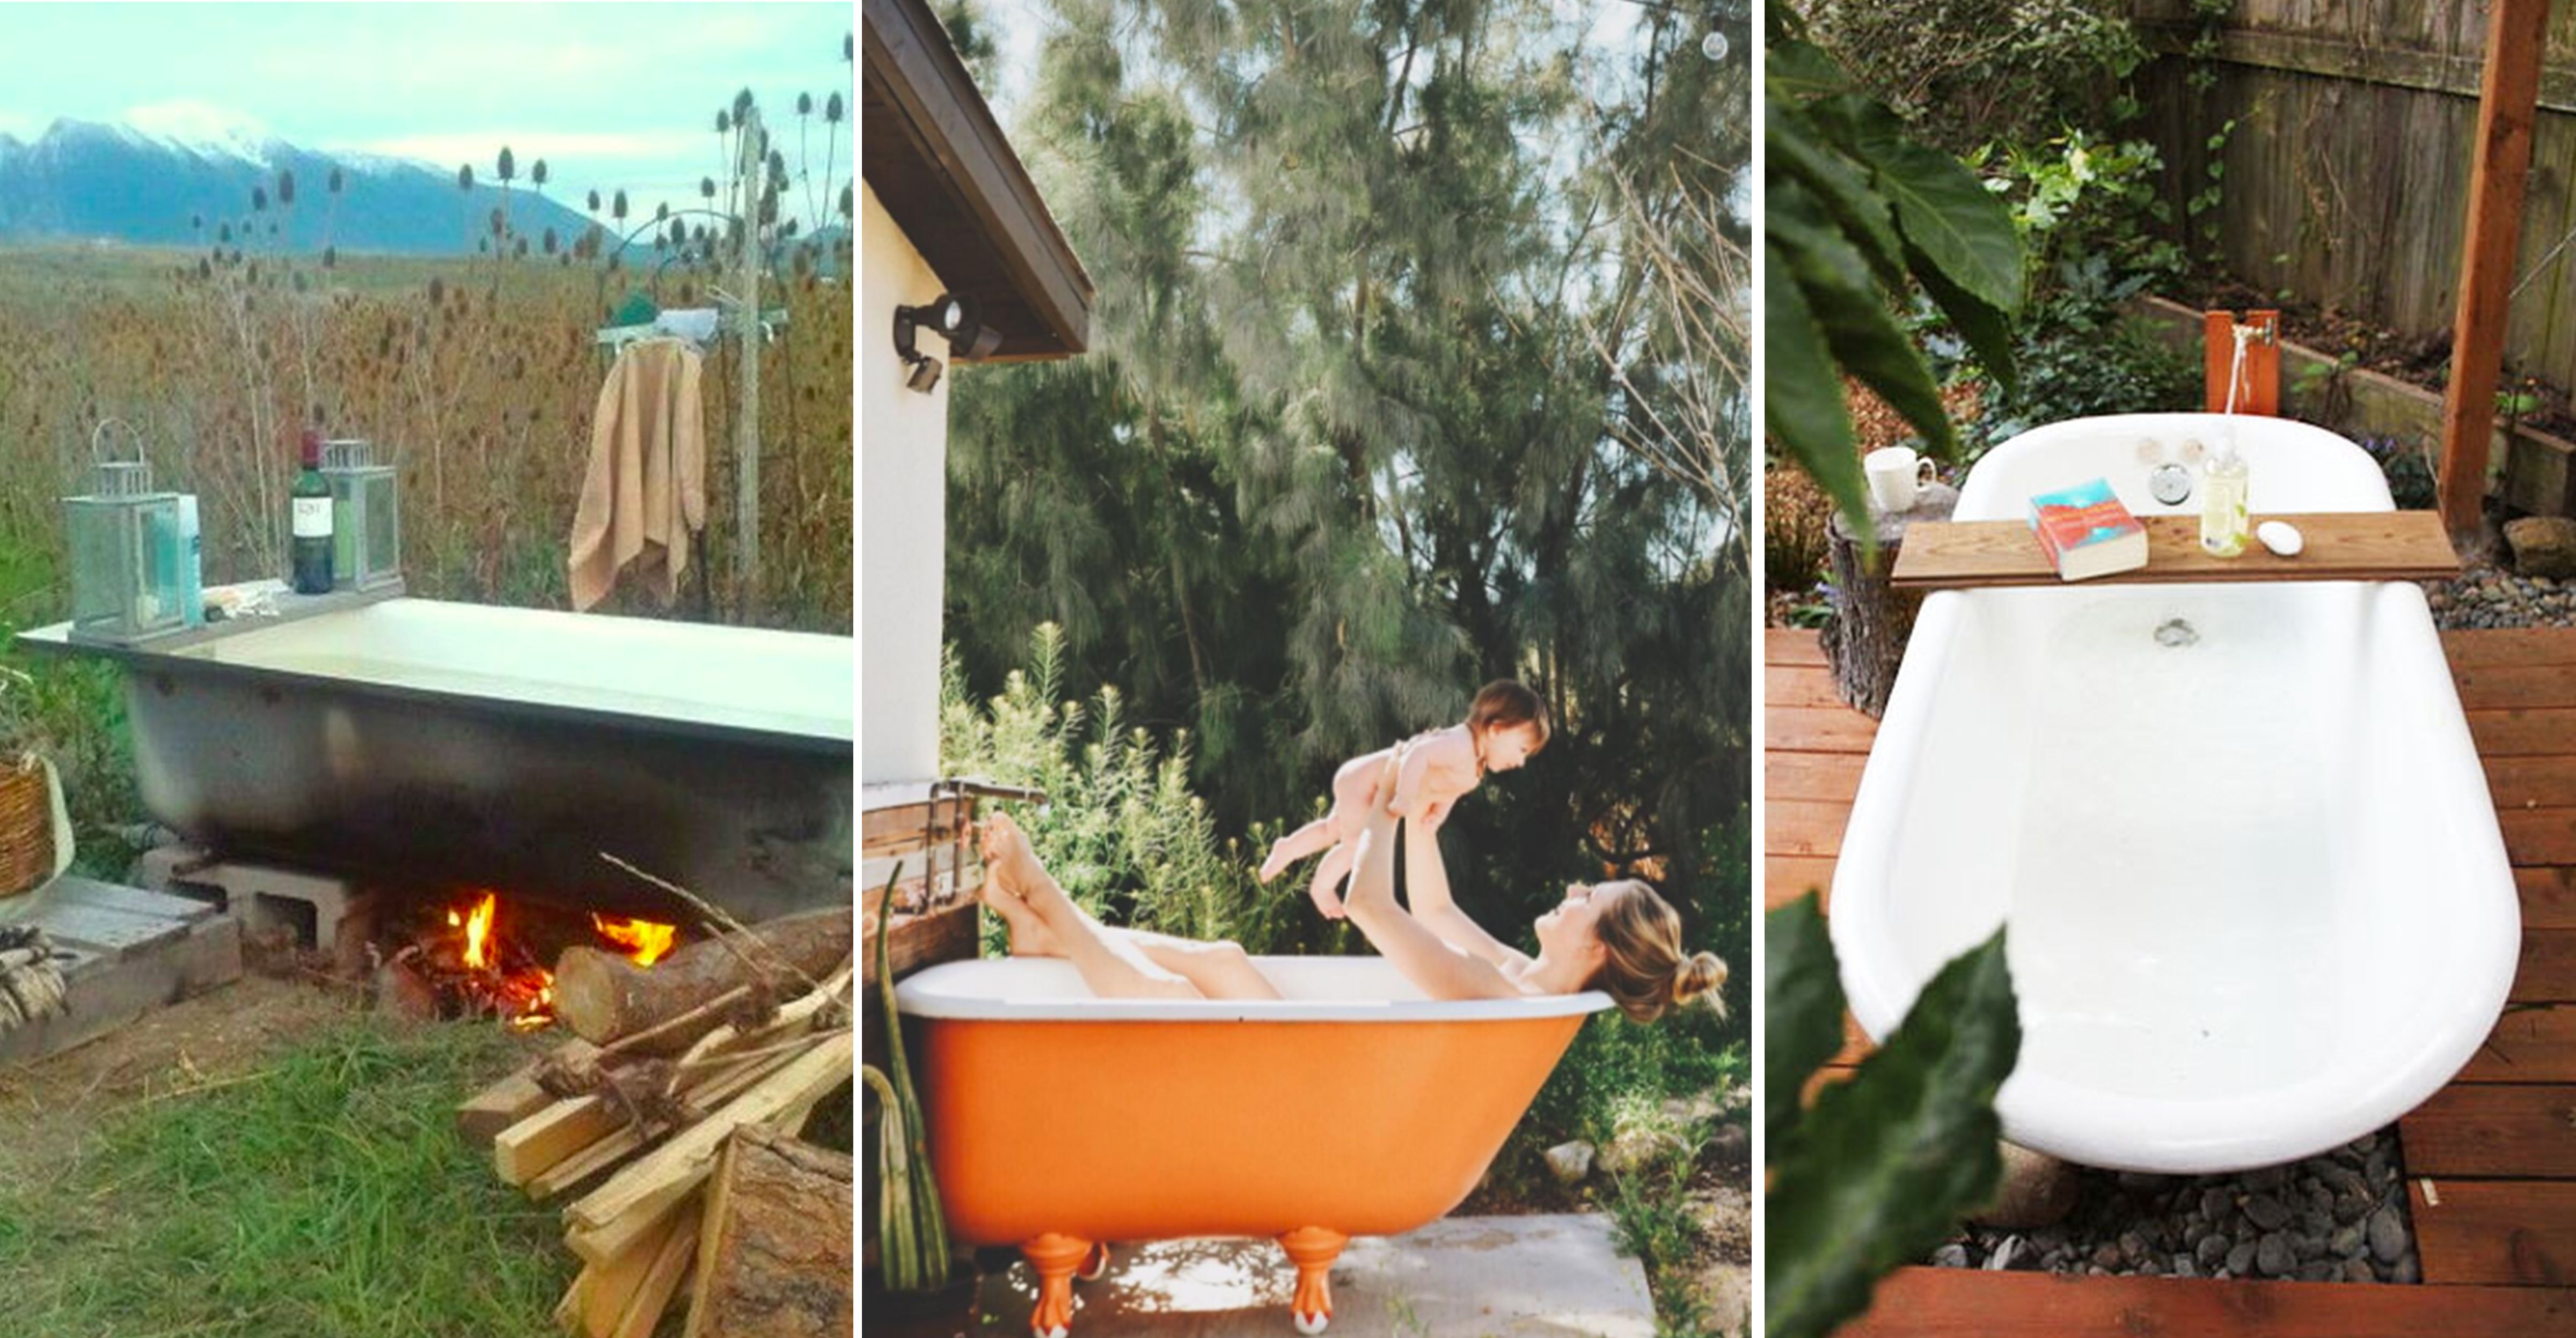 Backyard Bathtubs For Soaking Up The Great Outdoors